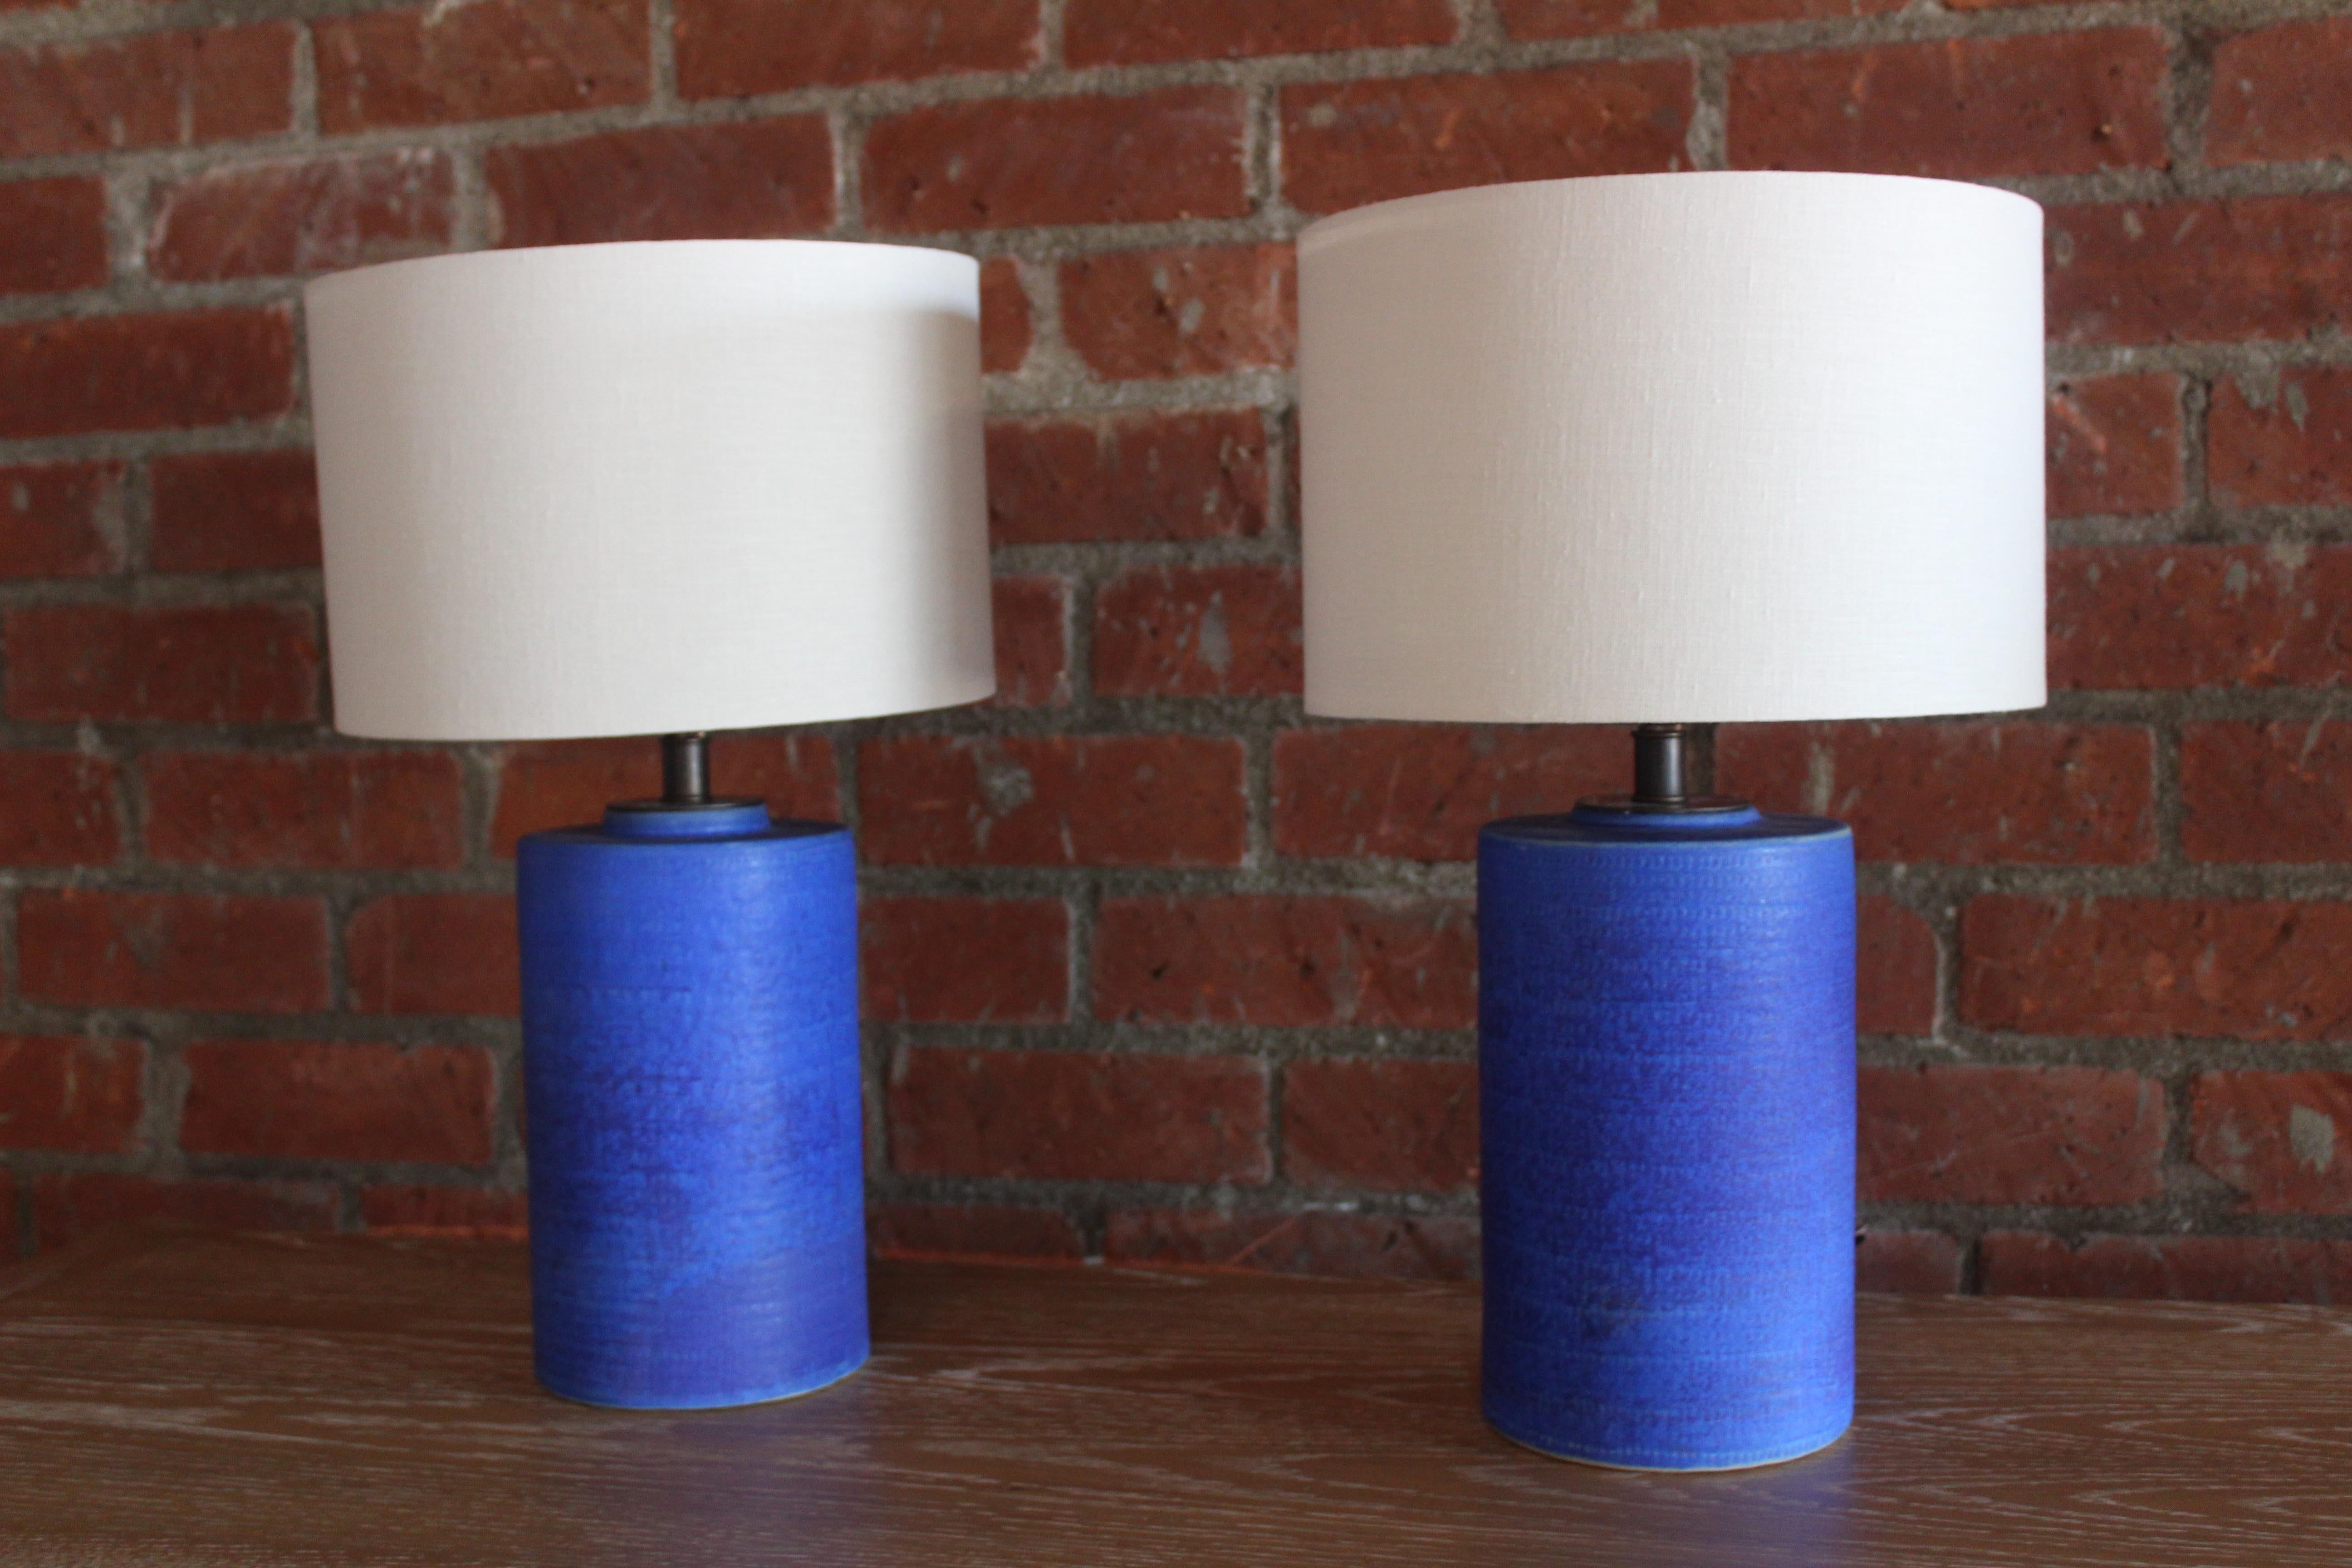 Pair of 1960s ceramic table lamps in cobalt blue. Newly rewired and fitted with custom made lamp shades in Belgian linen. Measures: The lamps are 20.5